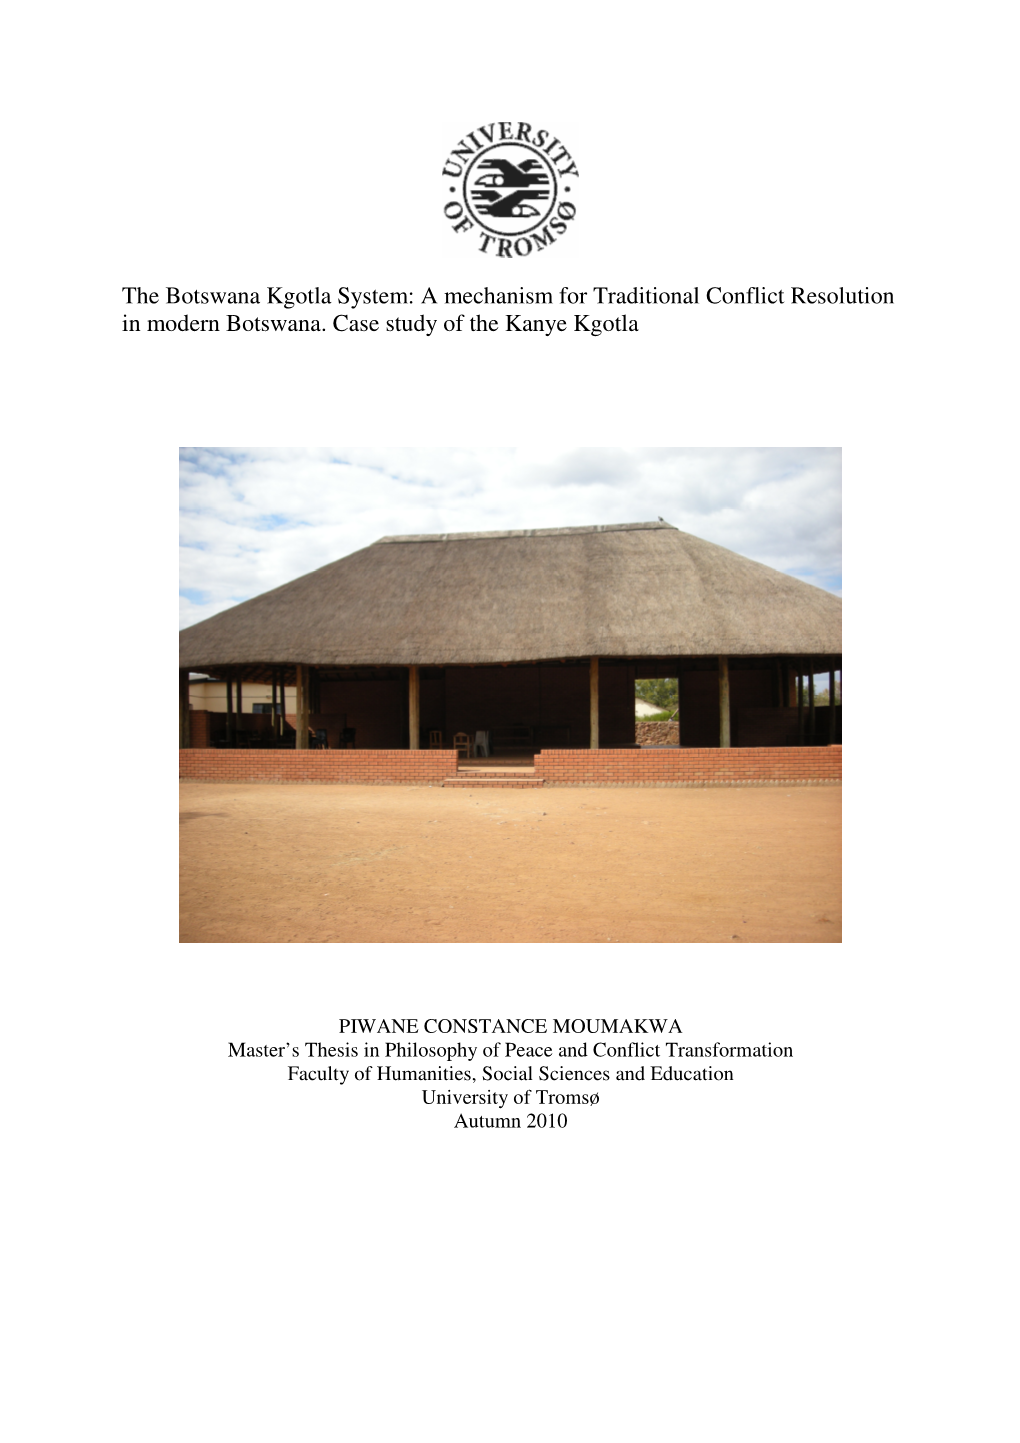 The Botswana Kgotla System: a Mechanism for Traditional Conflict Resolution in Modern Botswana